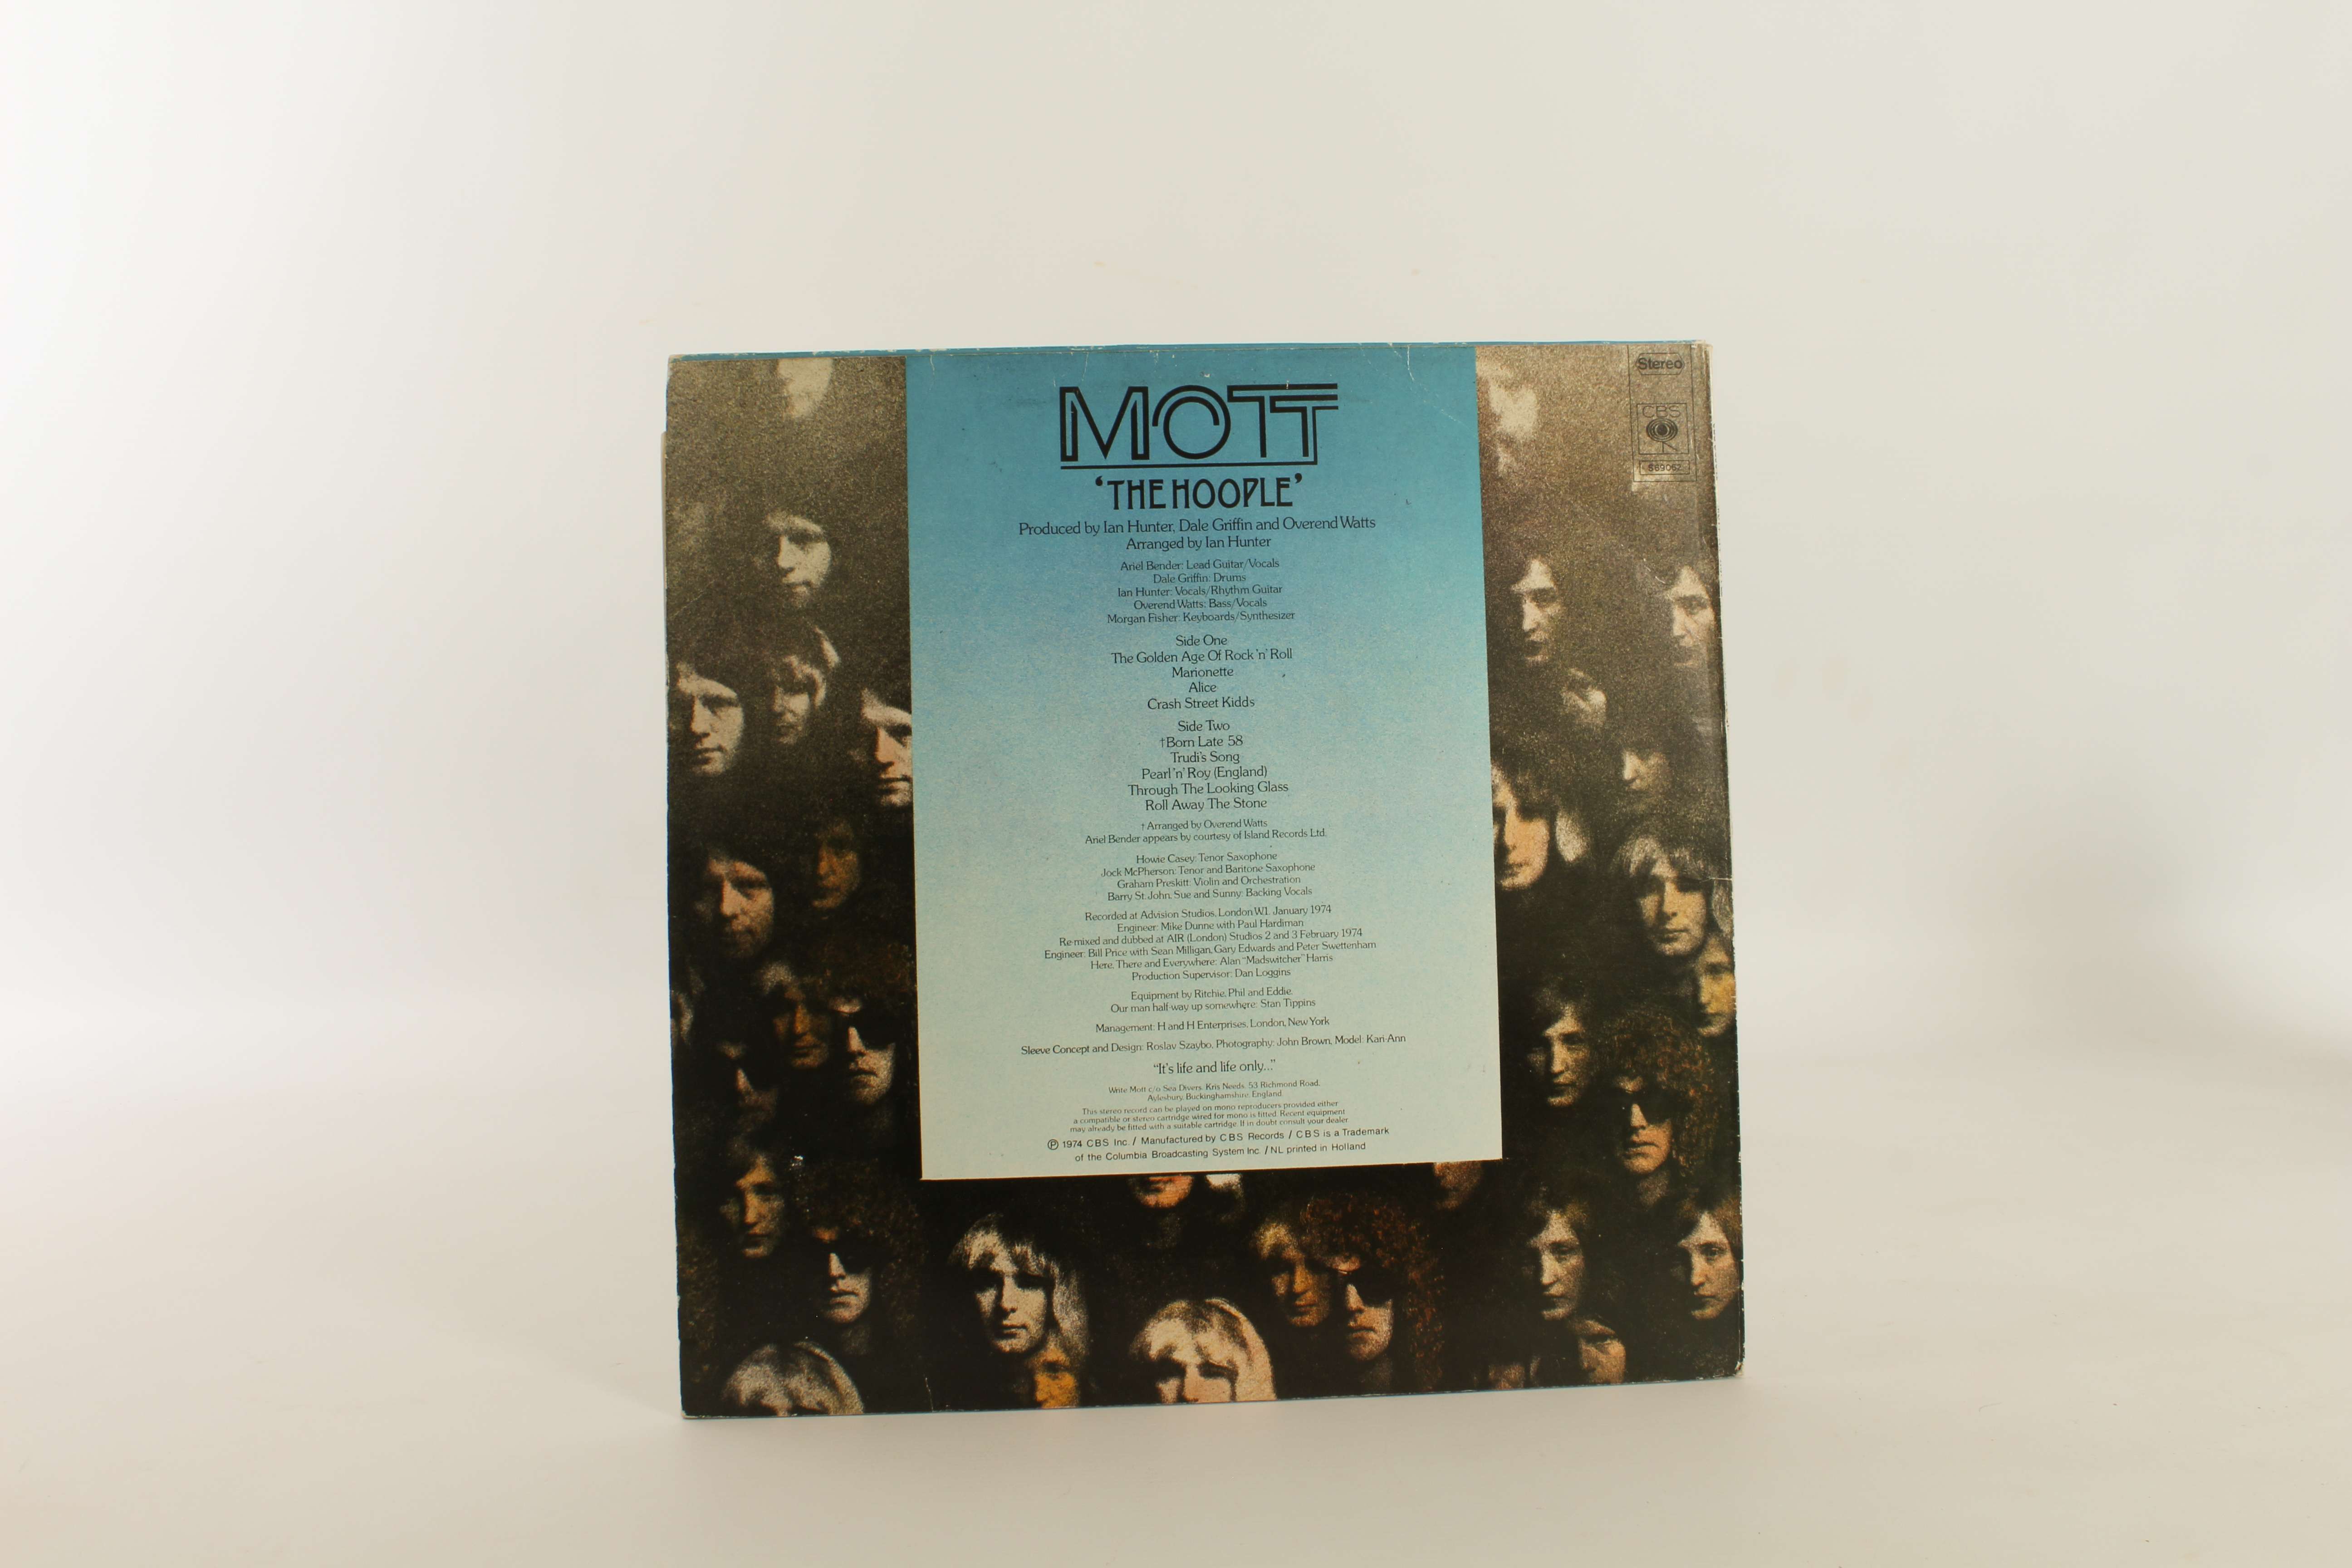 Vinyl / Autographs - Mott The Hoople - The Hoople. Original Uk album signed on front by Ian - Image 2 of 9